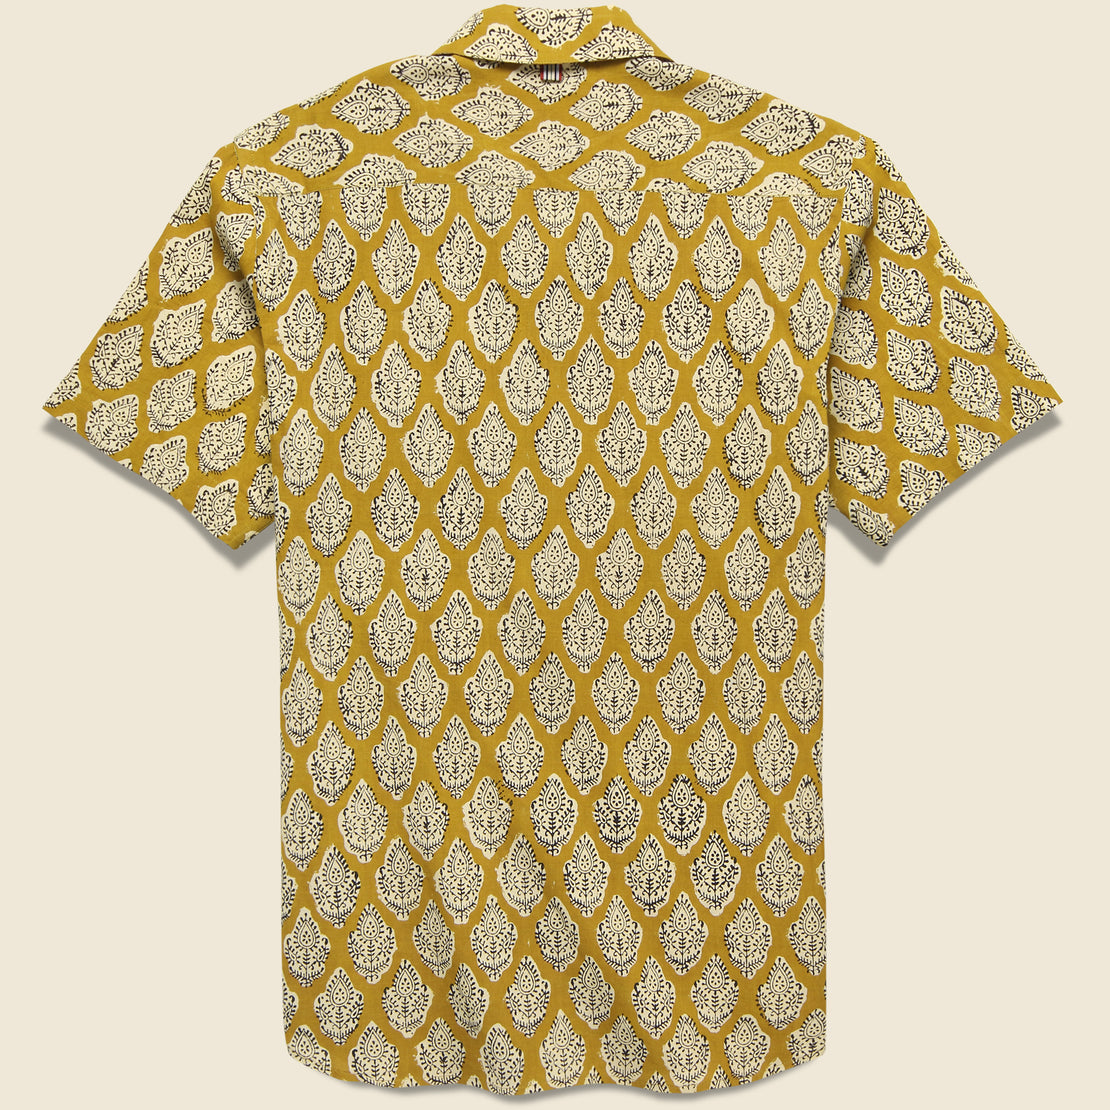 Lamar Block Print Paisley Shirt - Gold/Black - Kardo - STAG Provisions - Tops - S/S Woven - Other Pattern